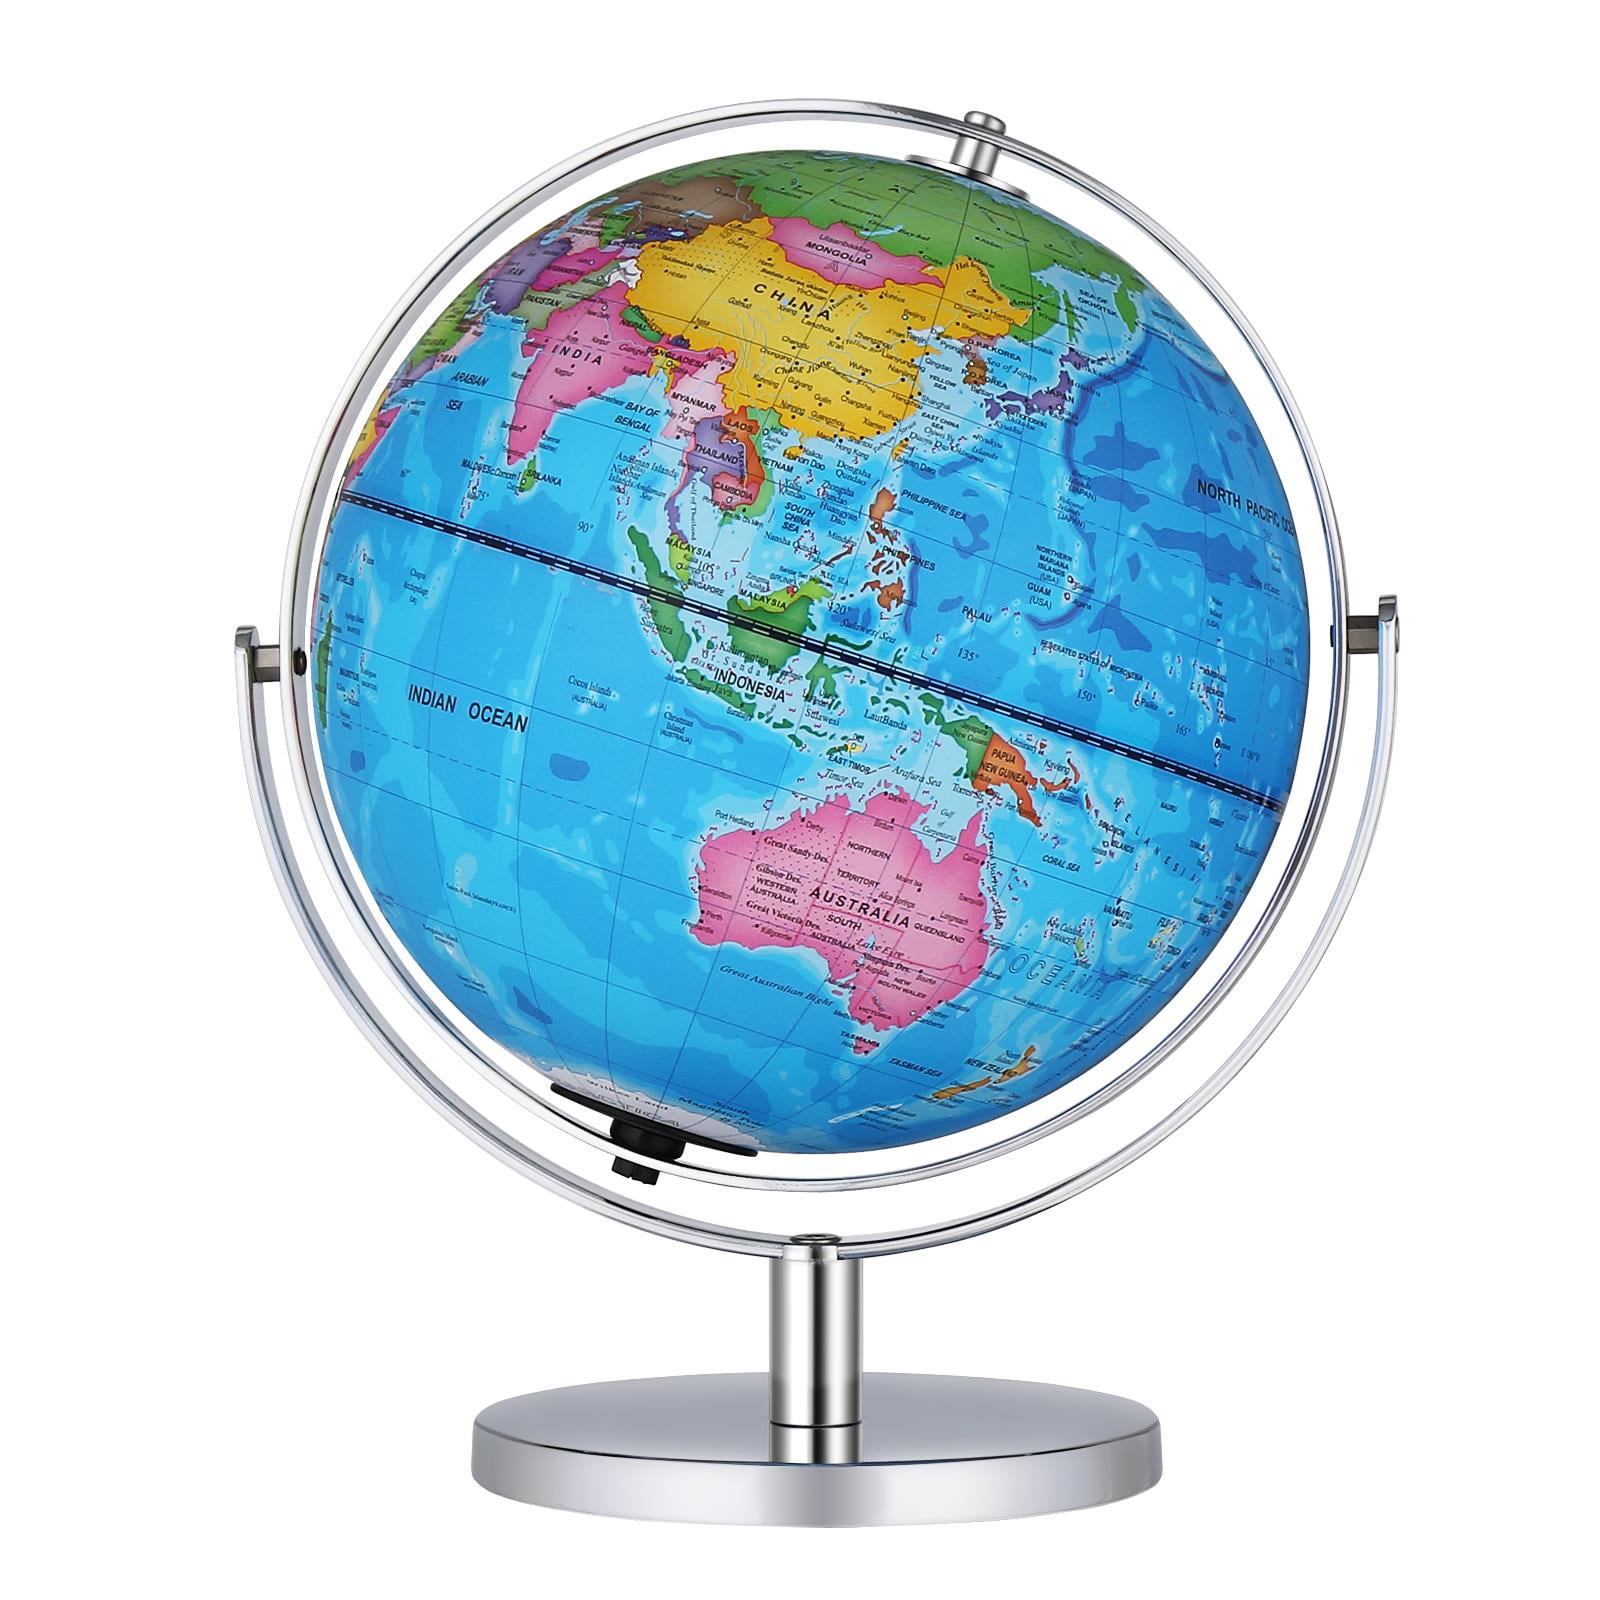 Little Experimenter Illuminated World Globe for Kids with Stand 